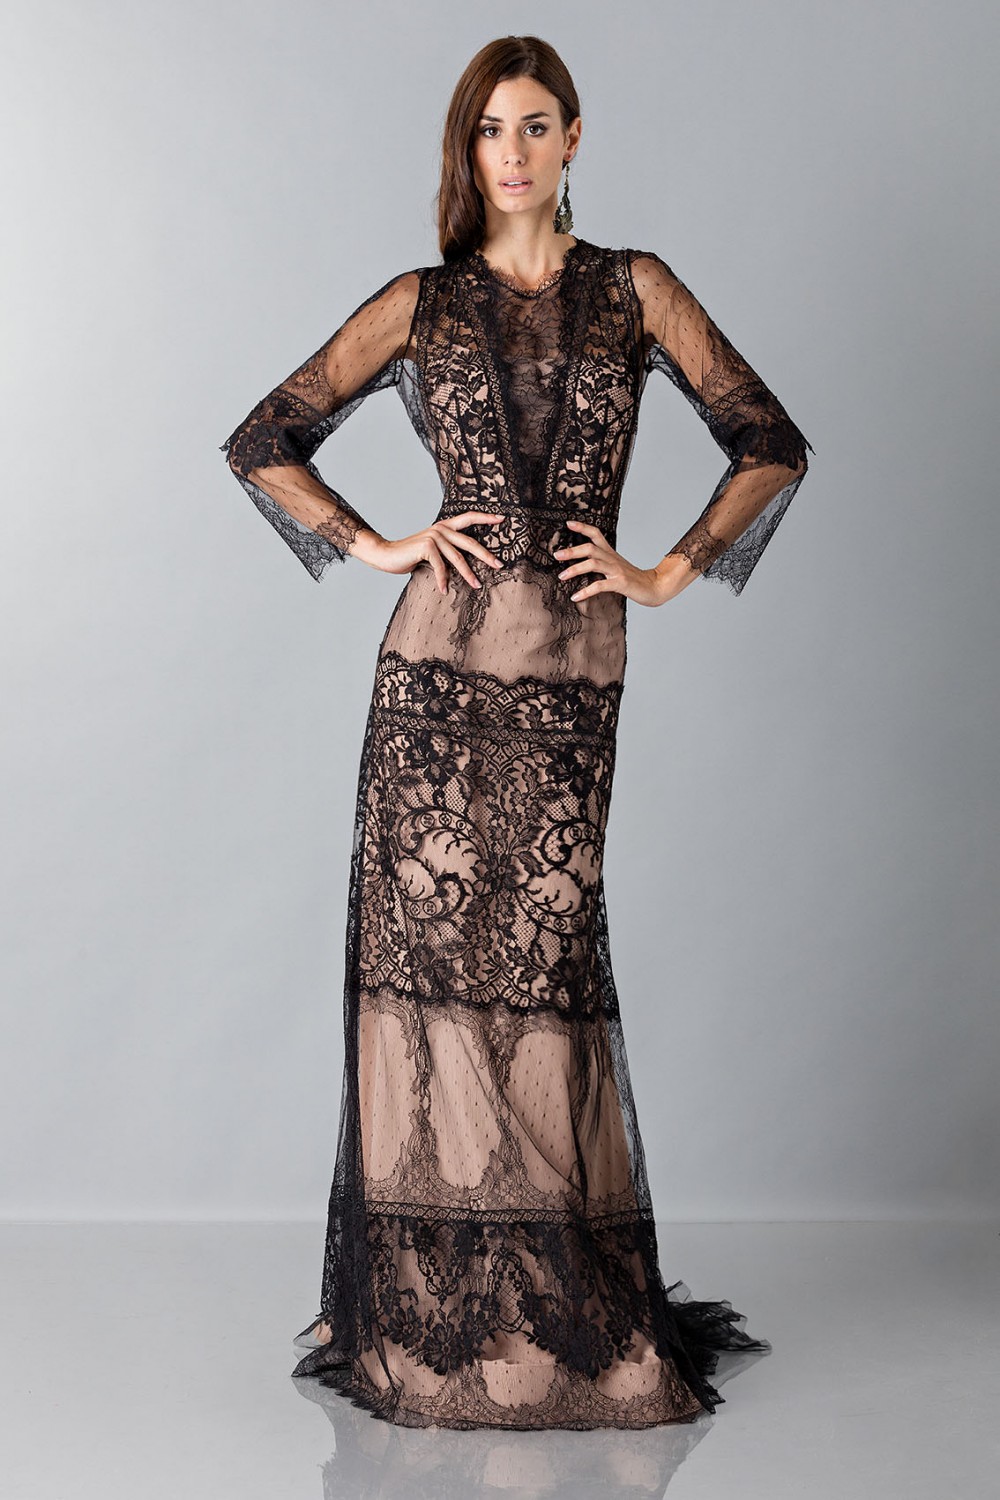 Long dress with lace patterns